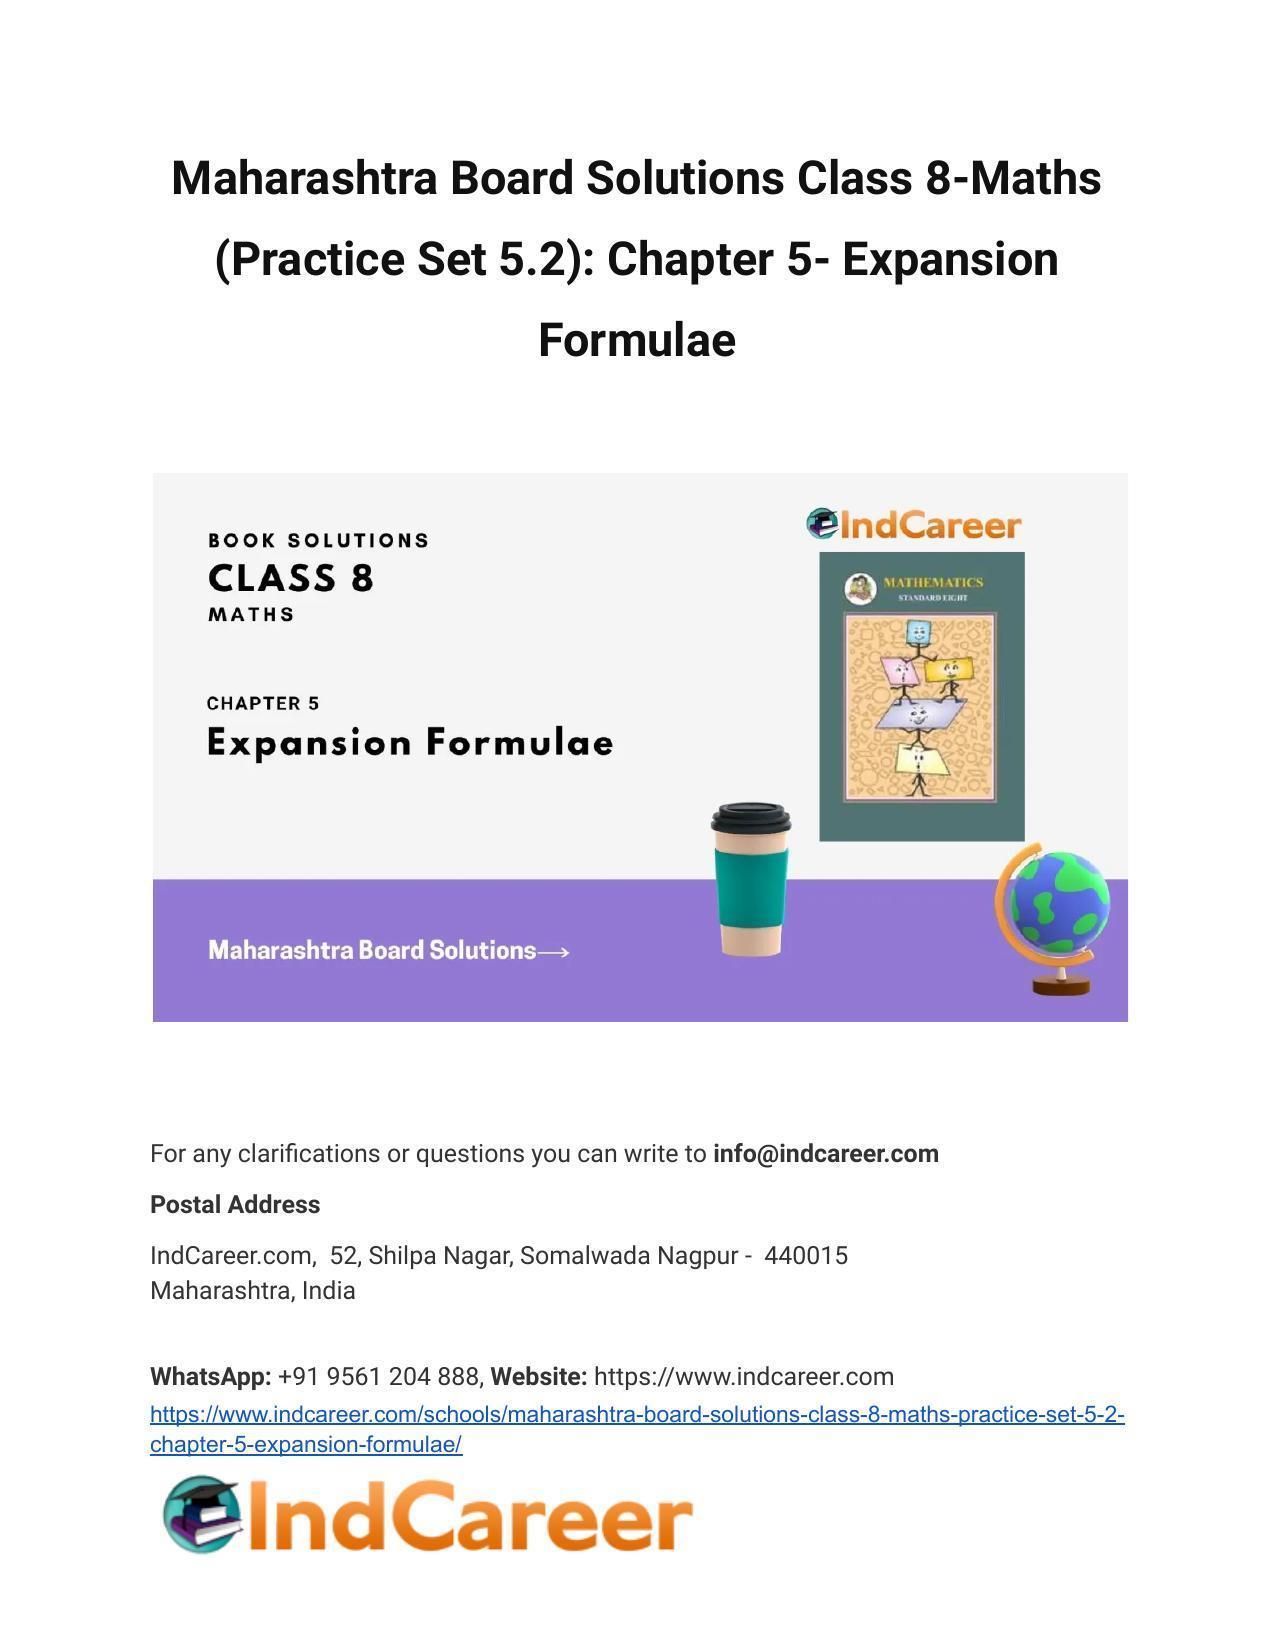 Maharashtra Board Solutions Class 8-Maths (Practice Set 5.2): Chapter 5- Expansion Formulae - Page 1